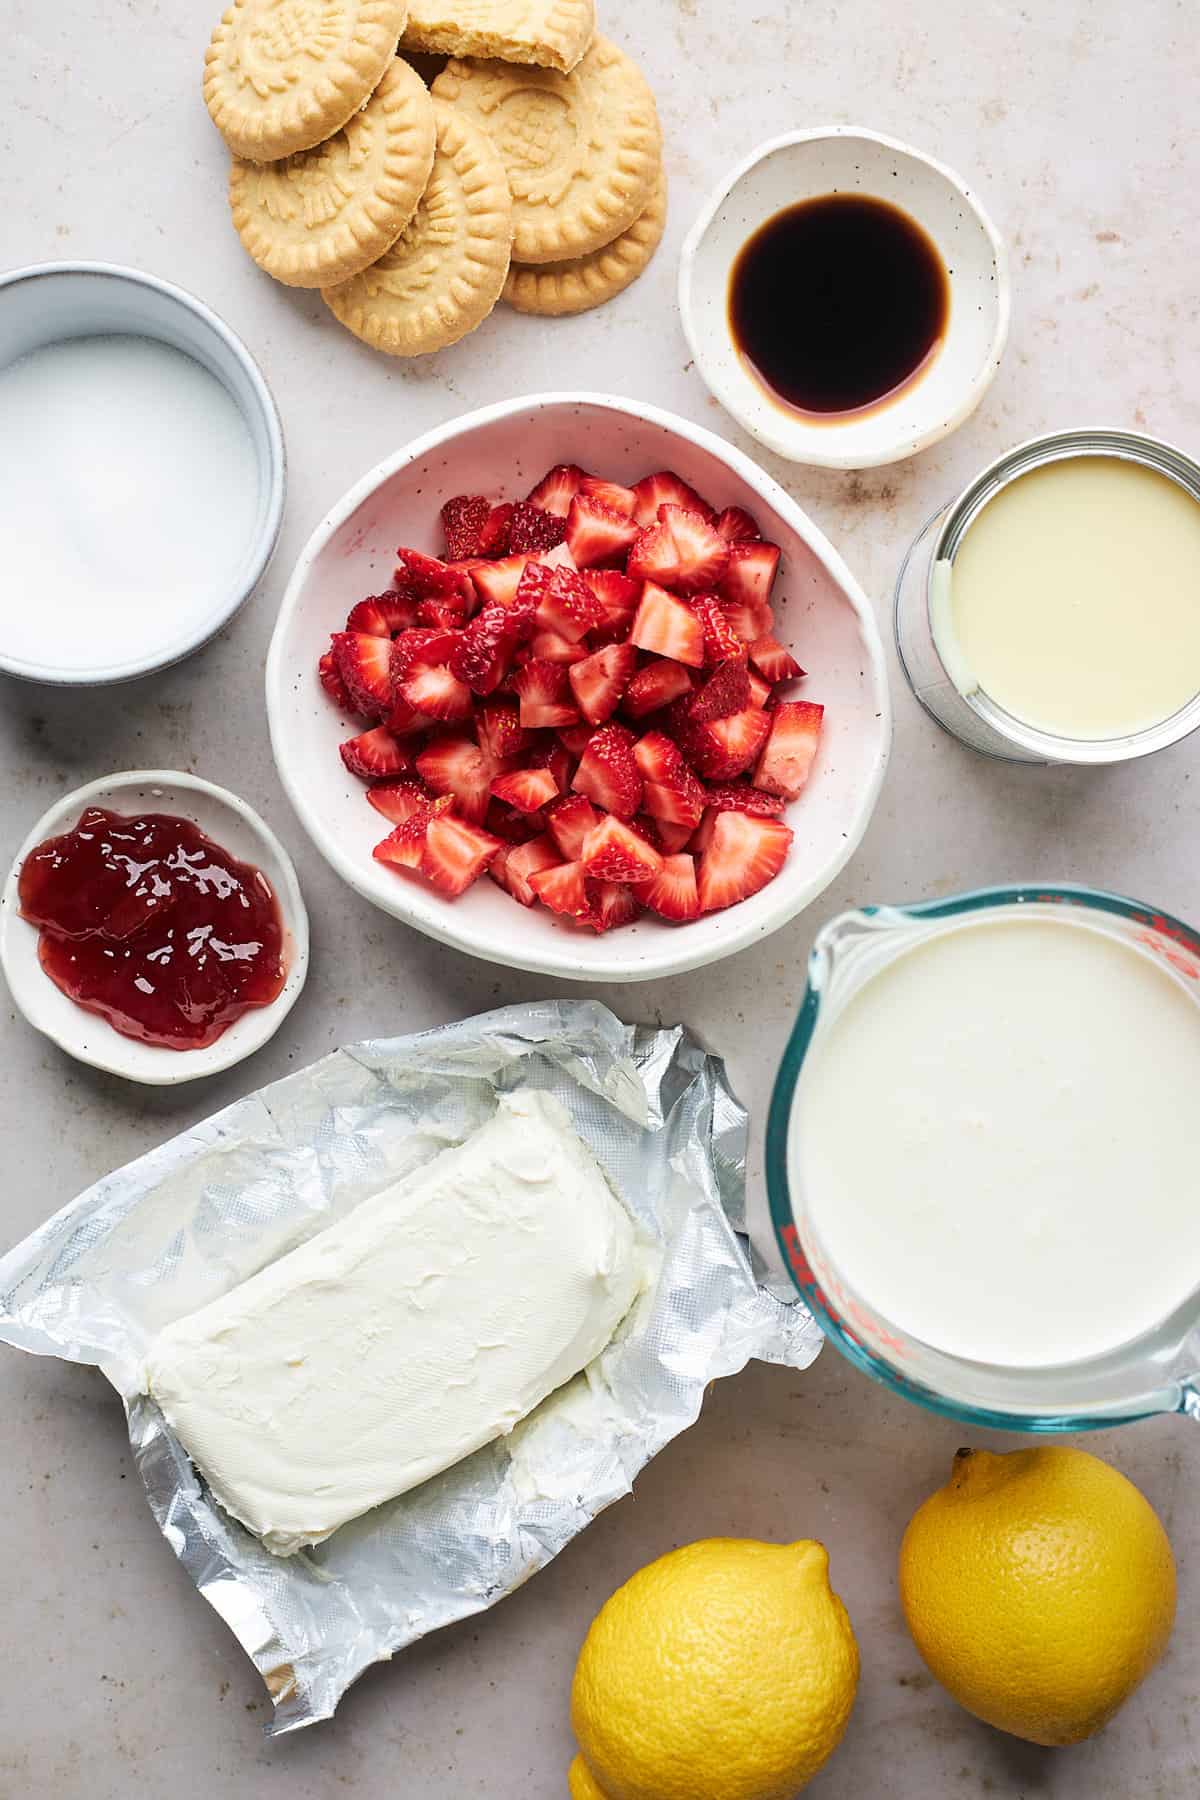 Cream cheese, strawberries, jam, shortbread cookies and everything else to make ice cream